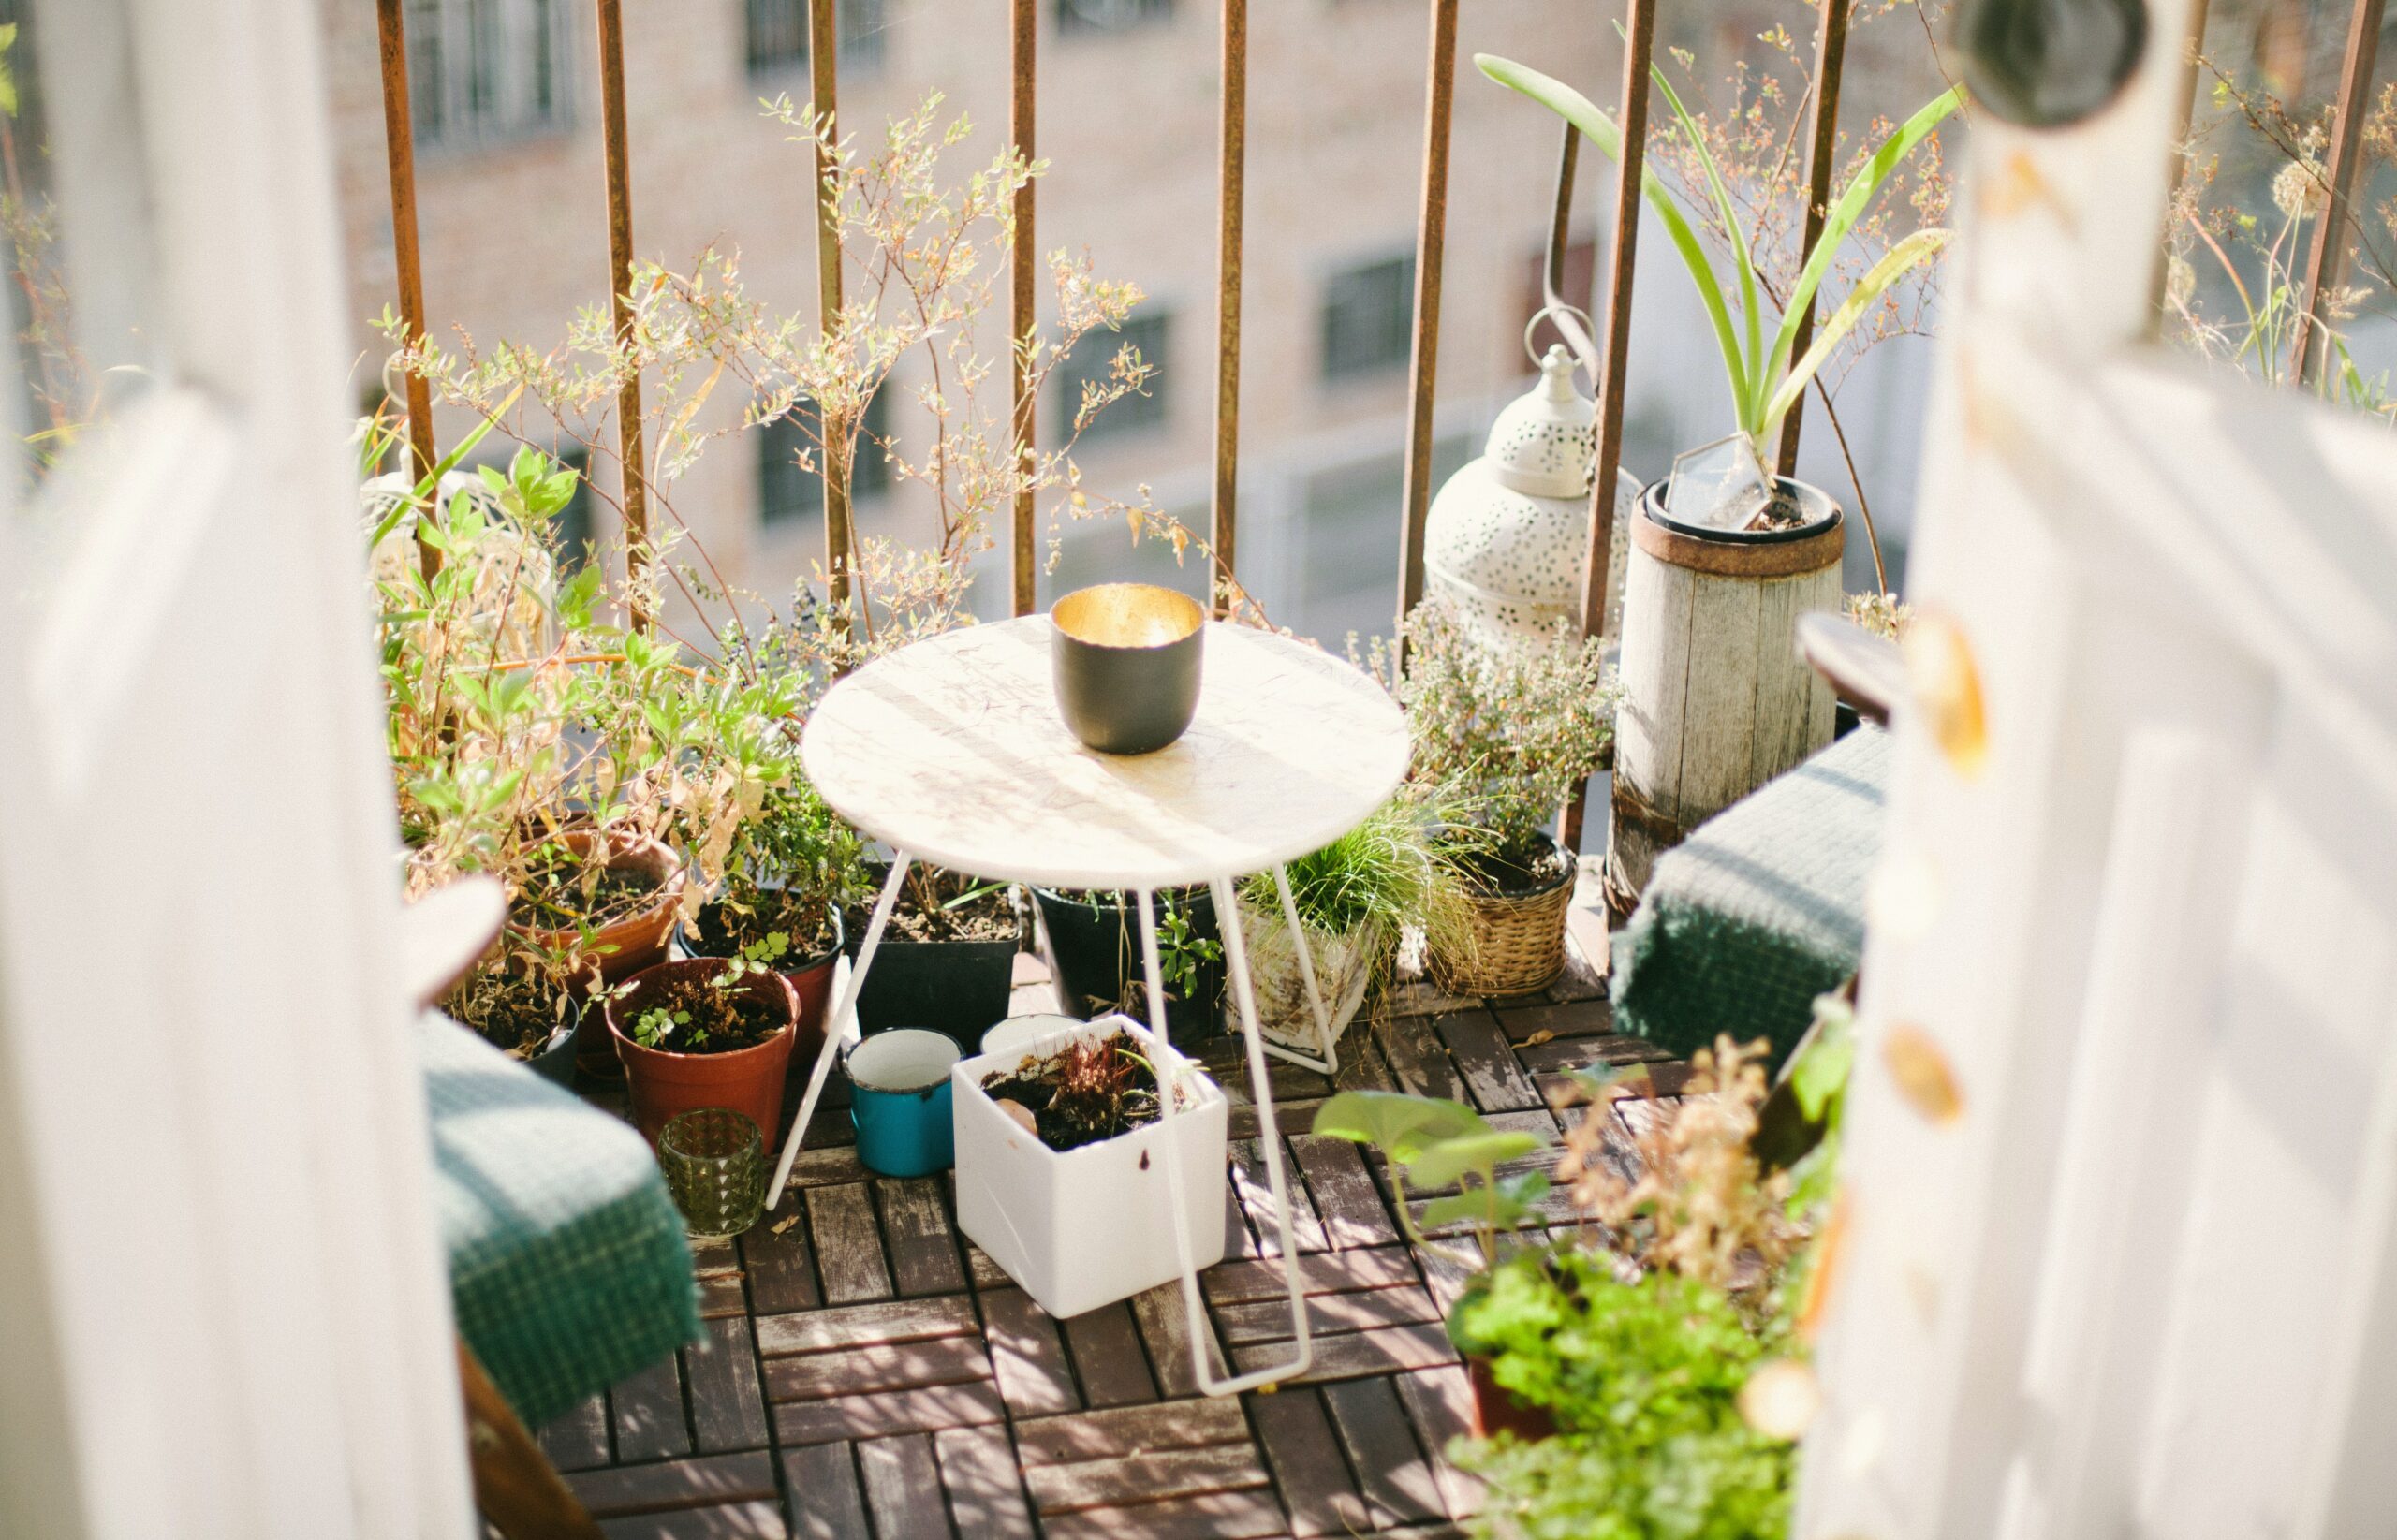 Finally, we can chill outside! Look forward to the Amazon must-haves for your balcony